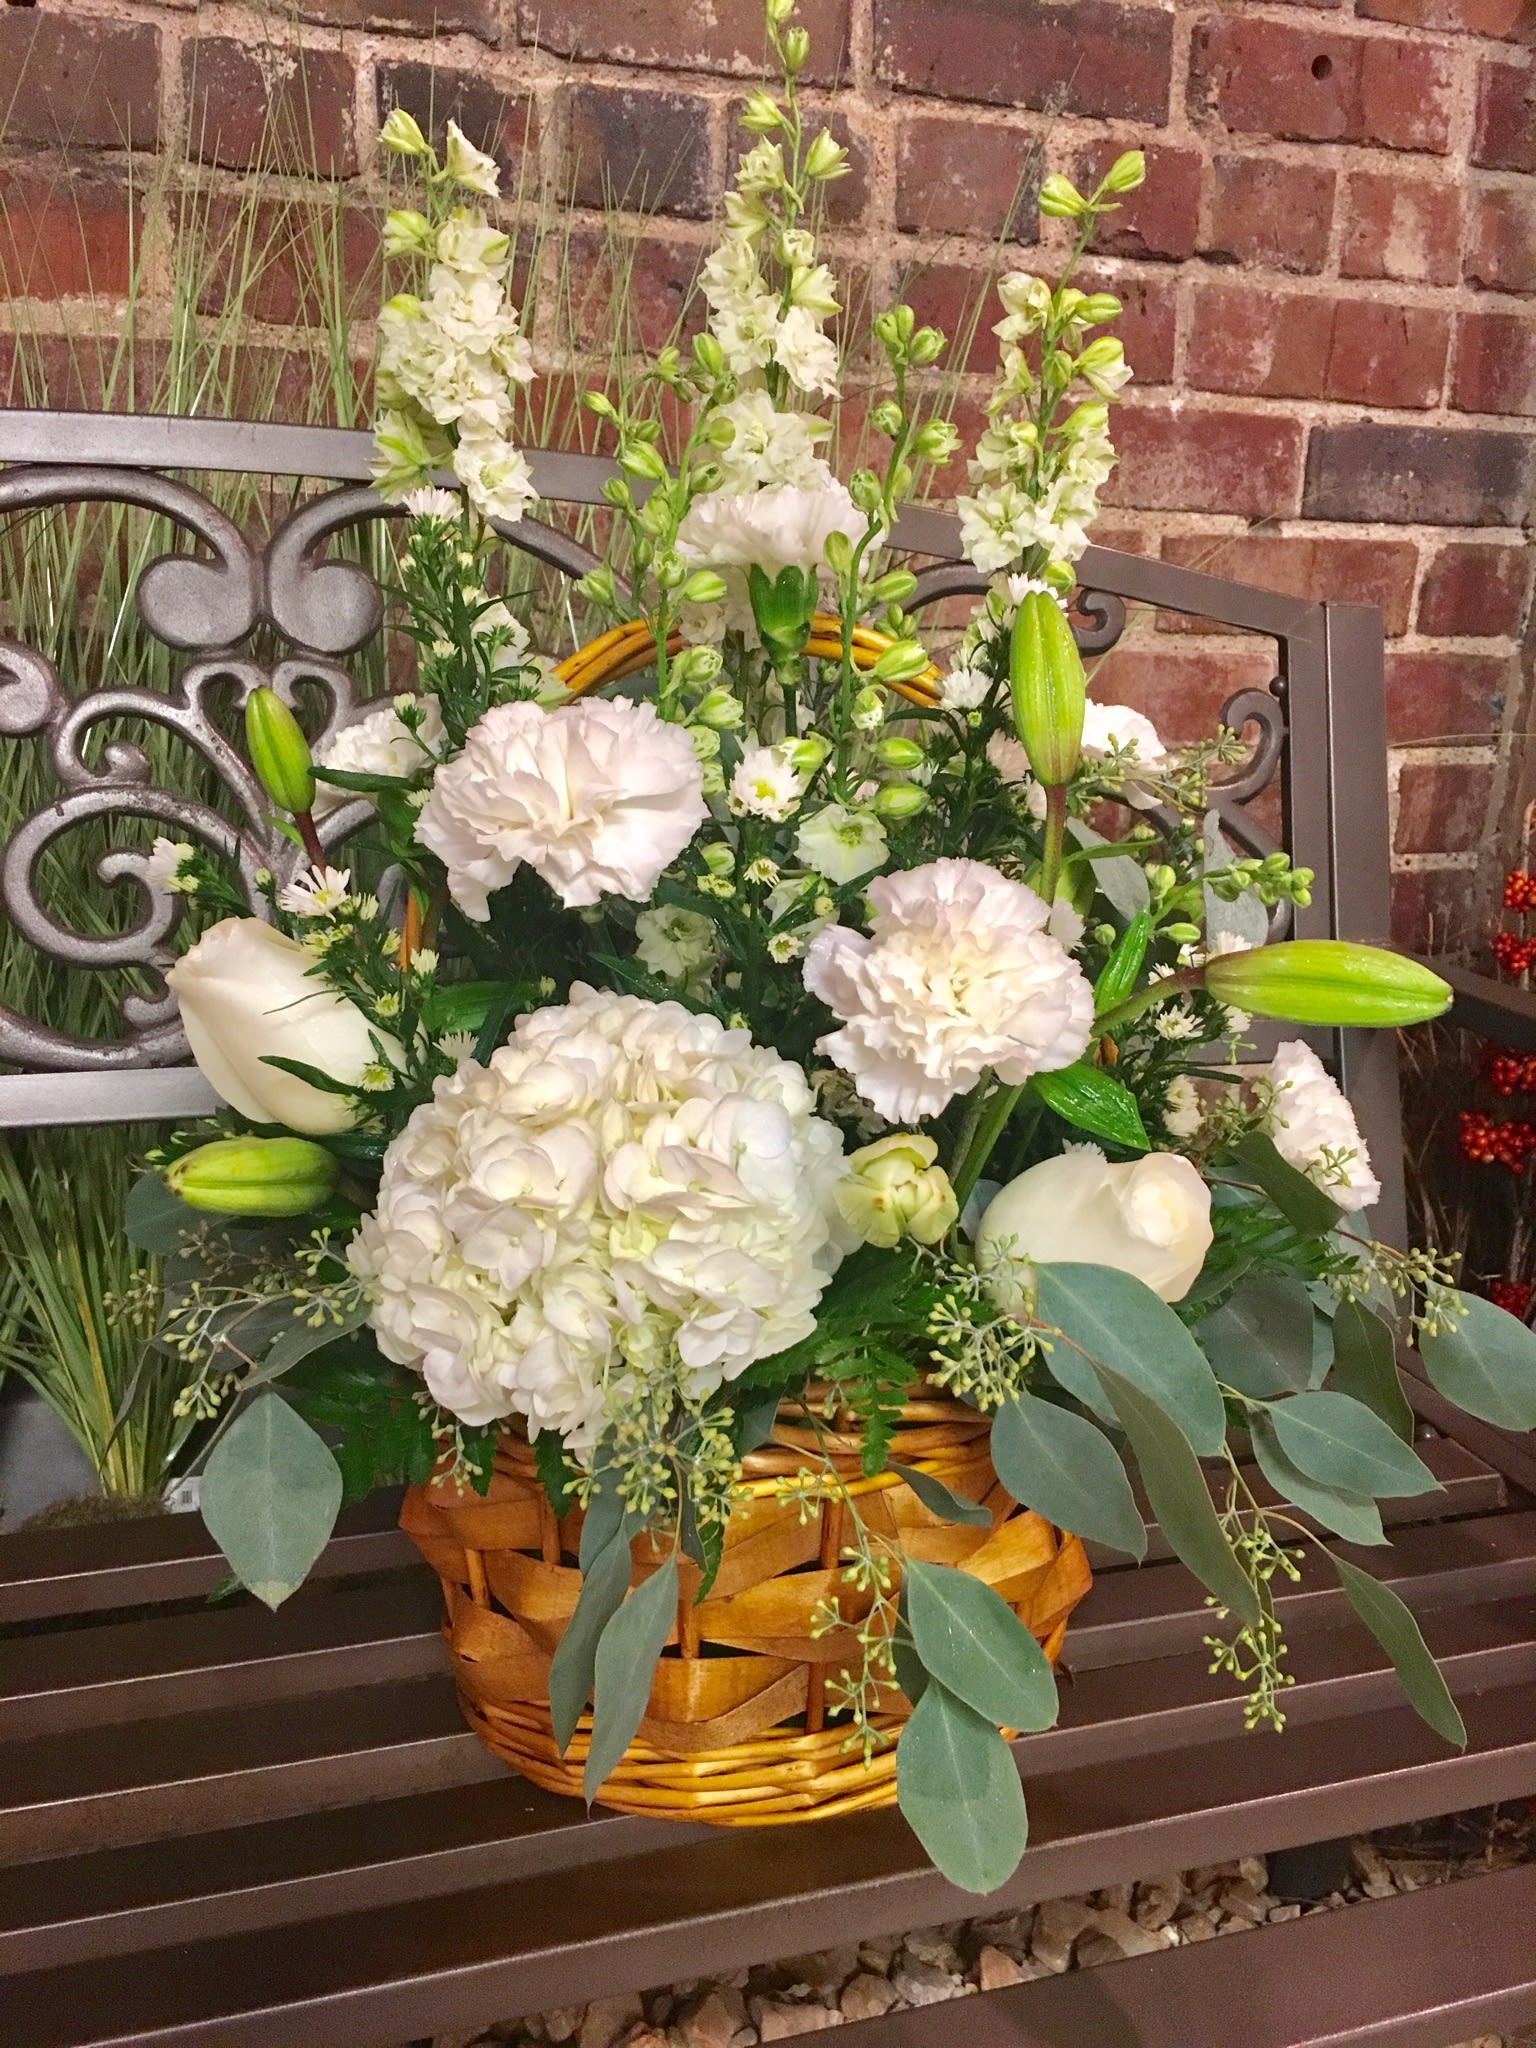 Quiet Blooms - A wicker basket filled with white blooms of hydrangea, roses, carnations, &amp; larkspur accented with mixed greens. 